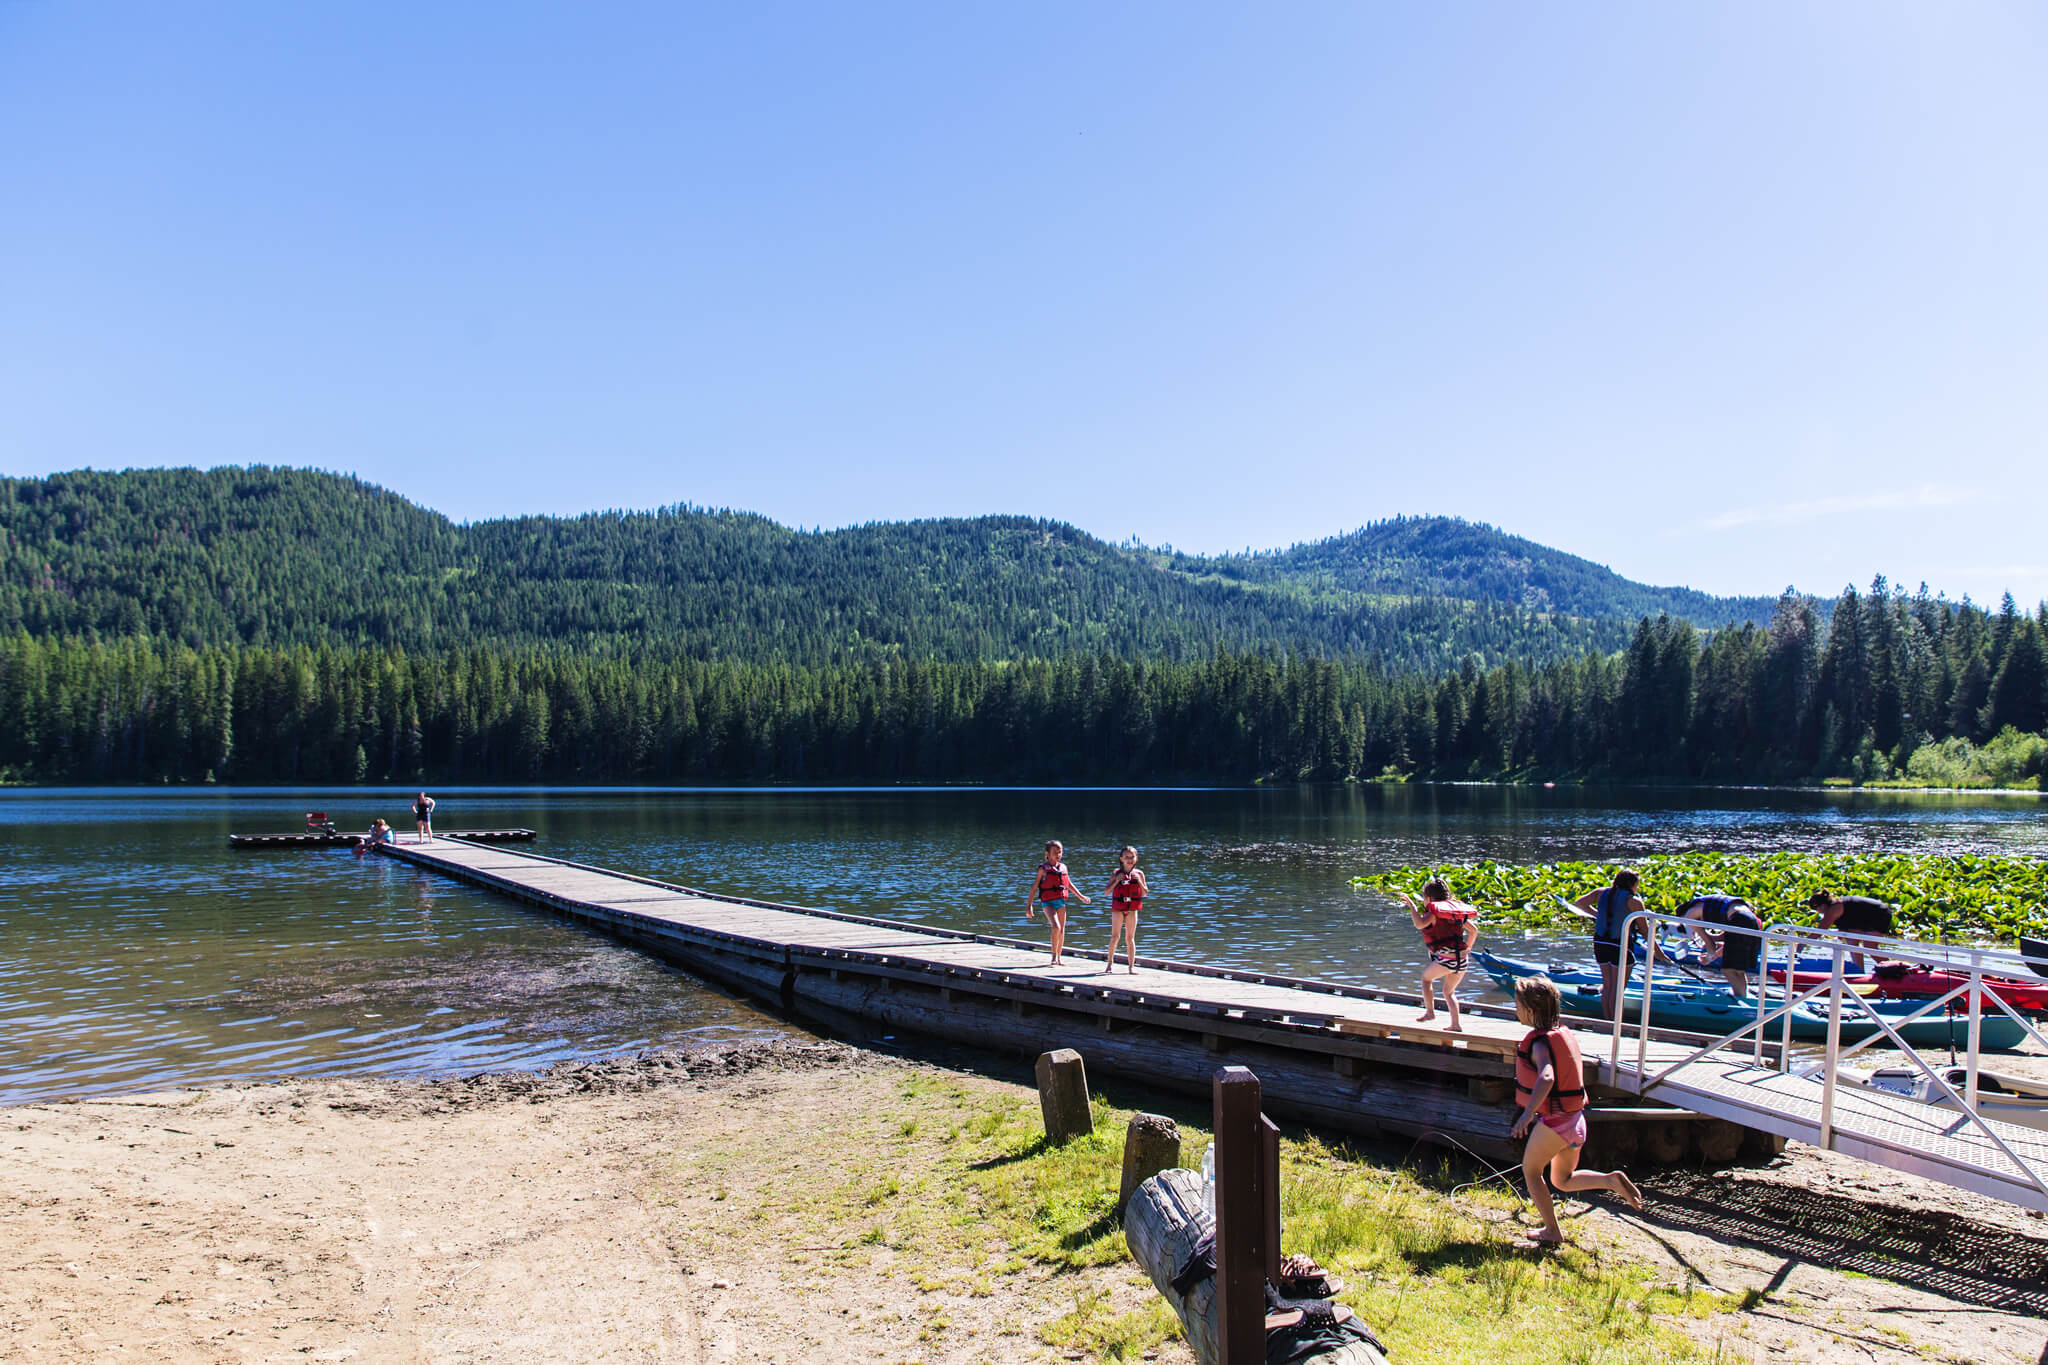 A group of people on a pier preparing to launch canoes at Round Lake, and a large forest in the background.